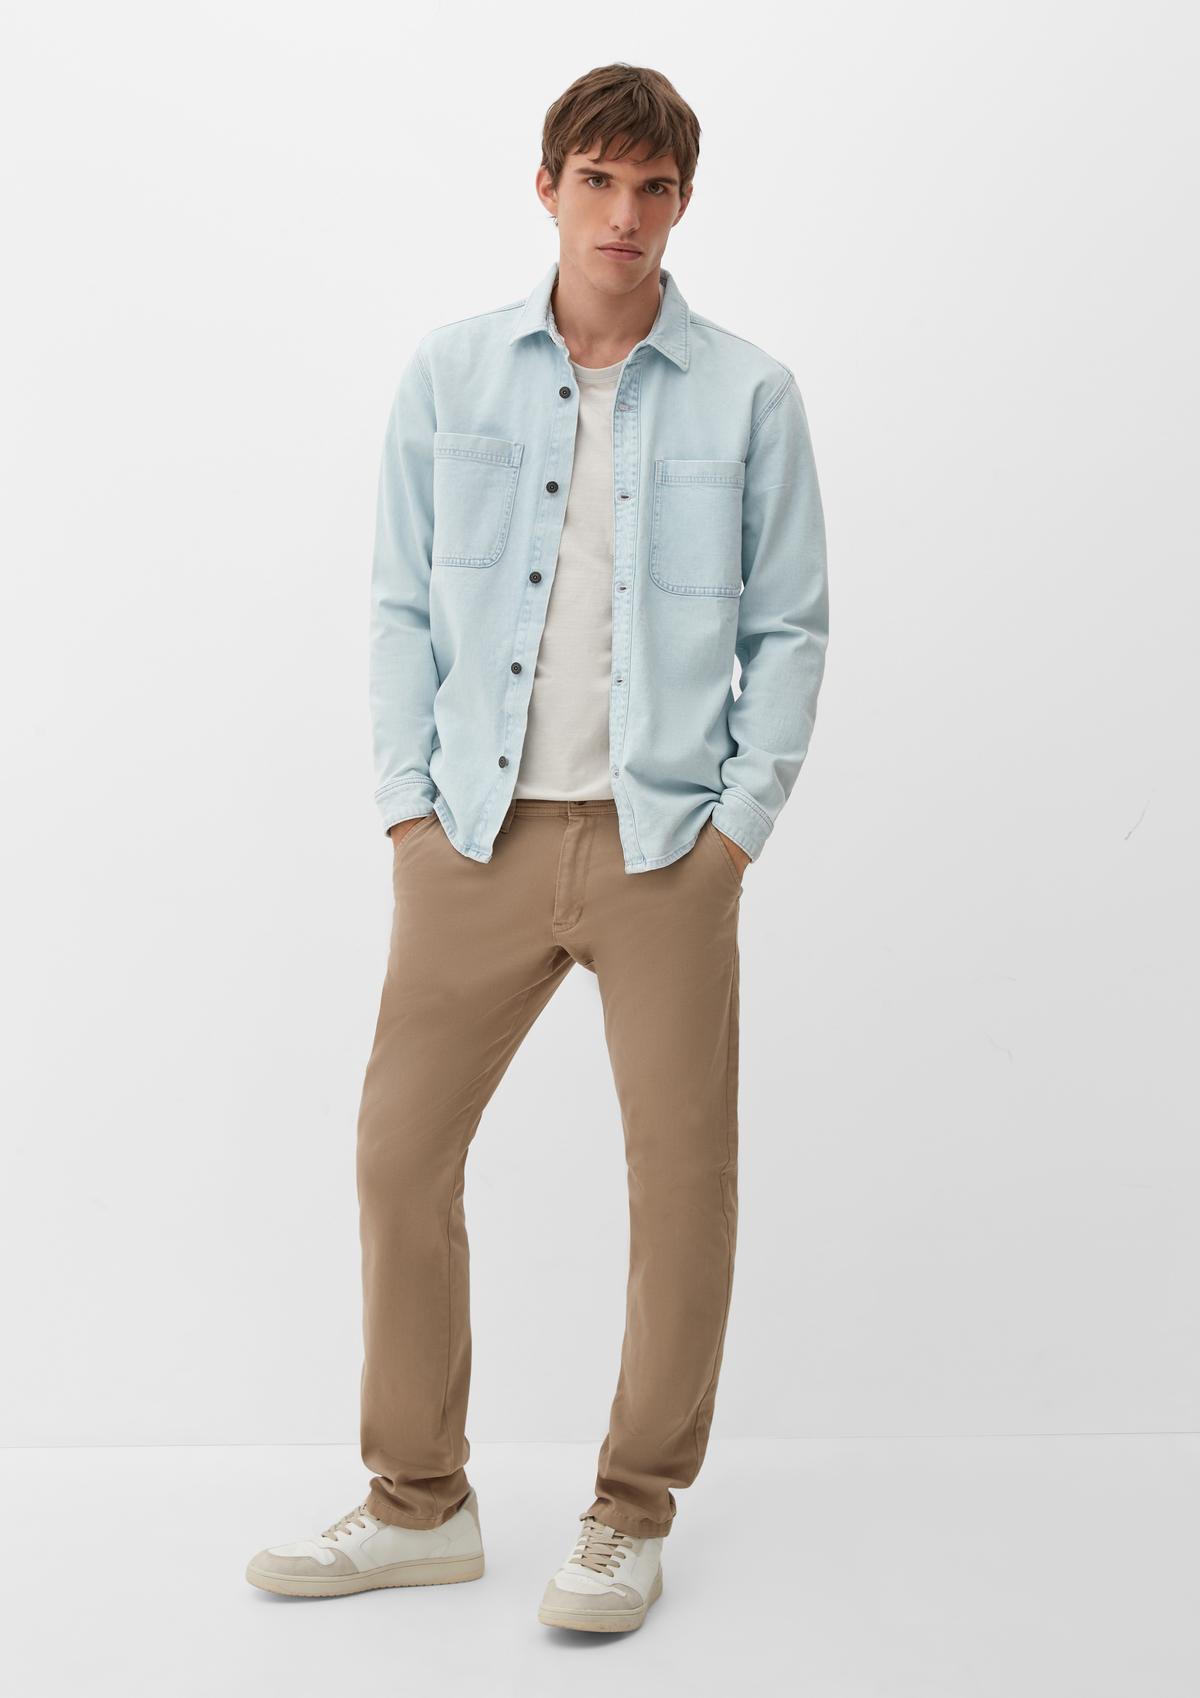 Men for Chinos